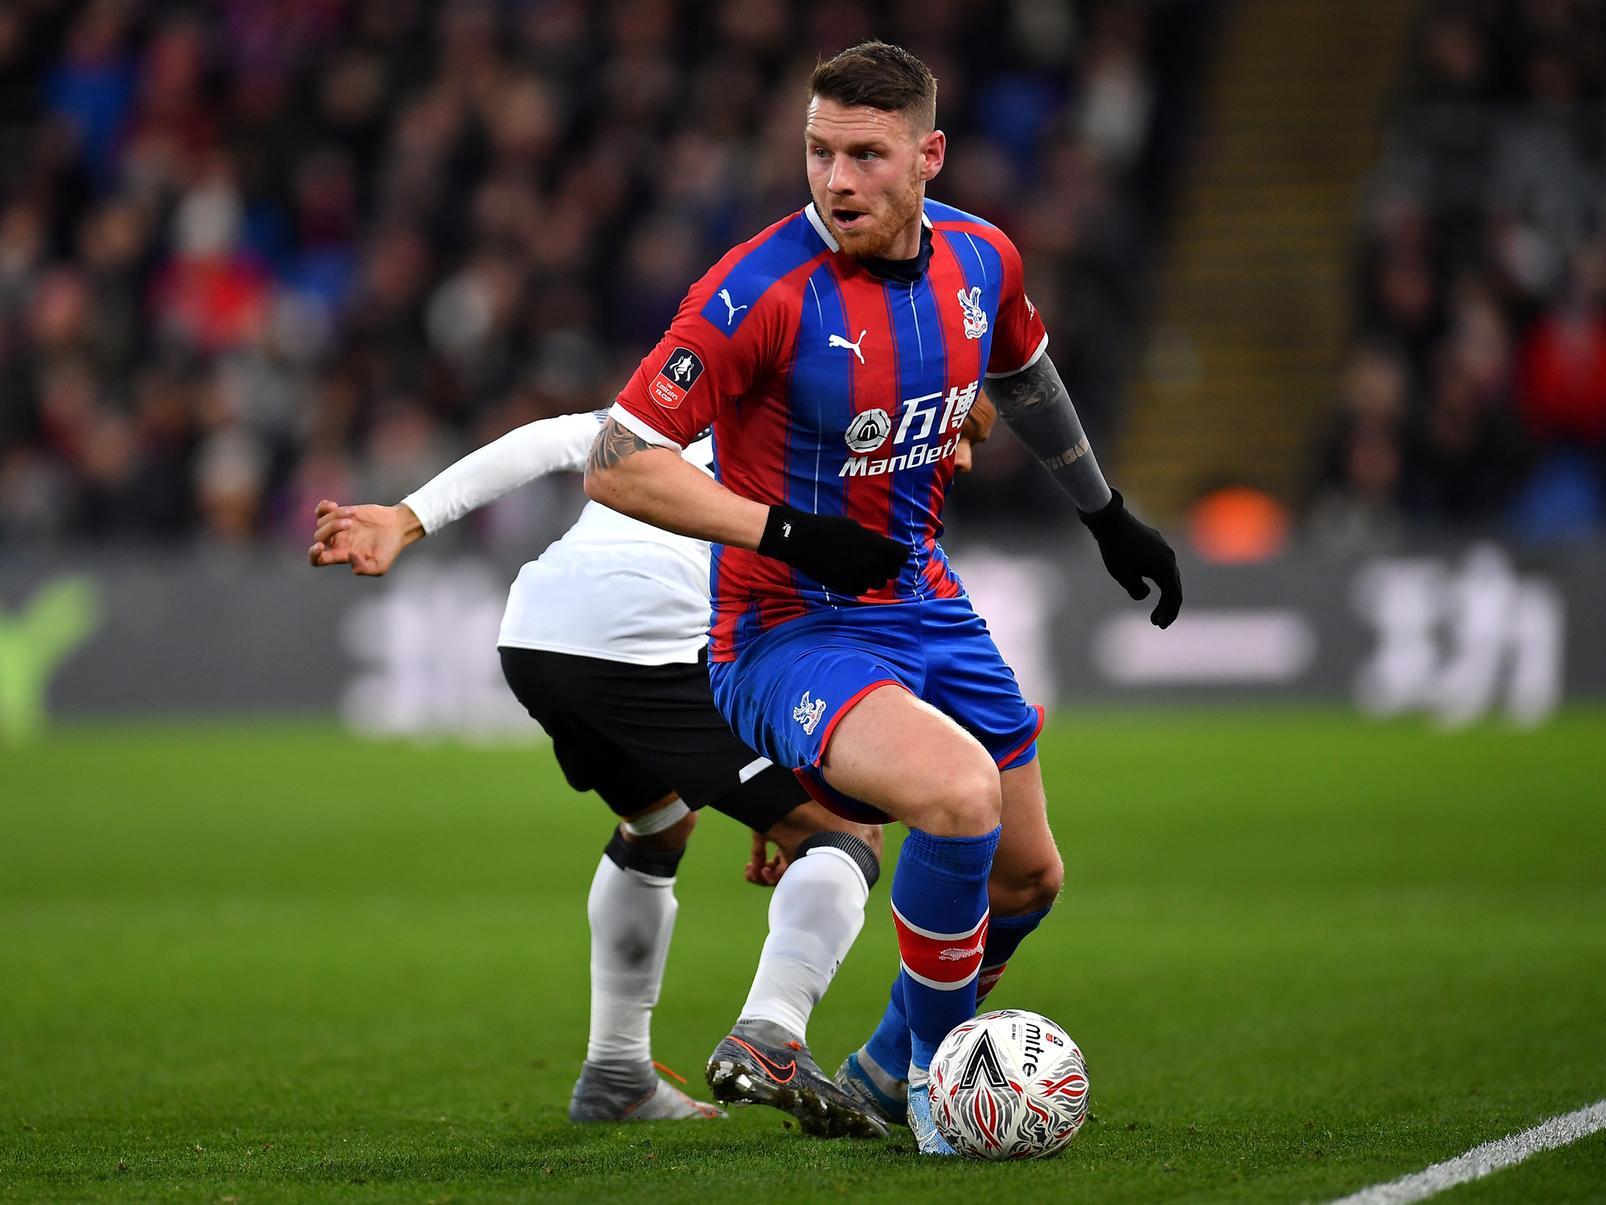 Cardiff City are reportedly ready to hijack Sheffield Wednesday's loan move for Crystal Palace striker Connor Wickham, and could offer the Premier League outfit a higher wage contribution than the Owls. (Wales Online)